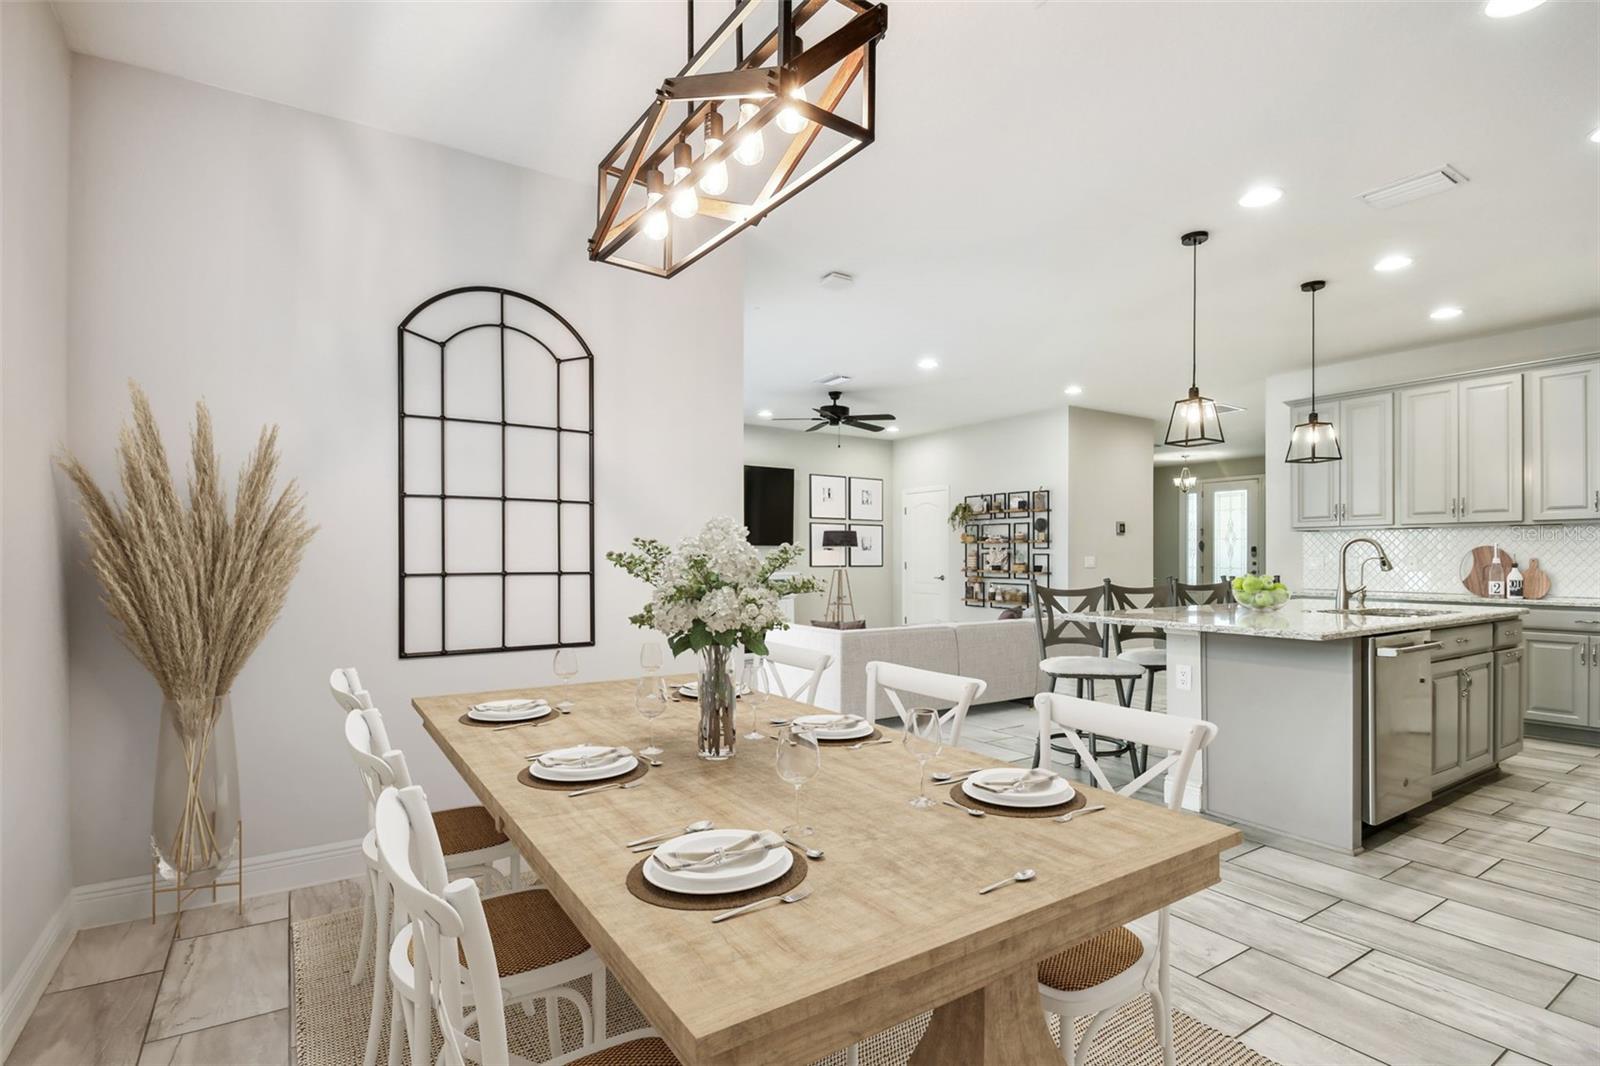 Beautiful Eat in kitchen space